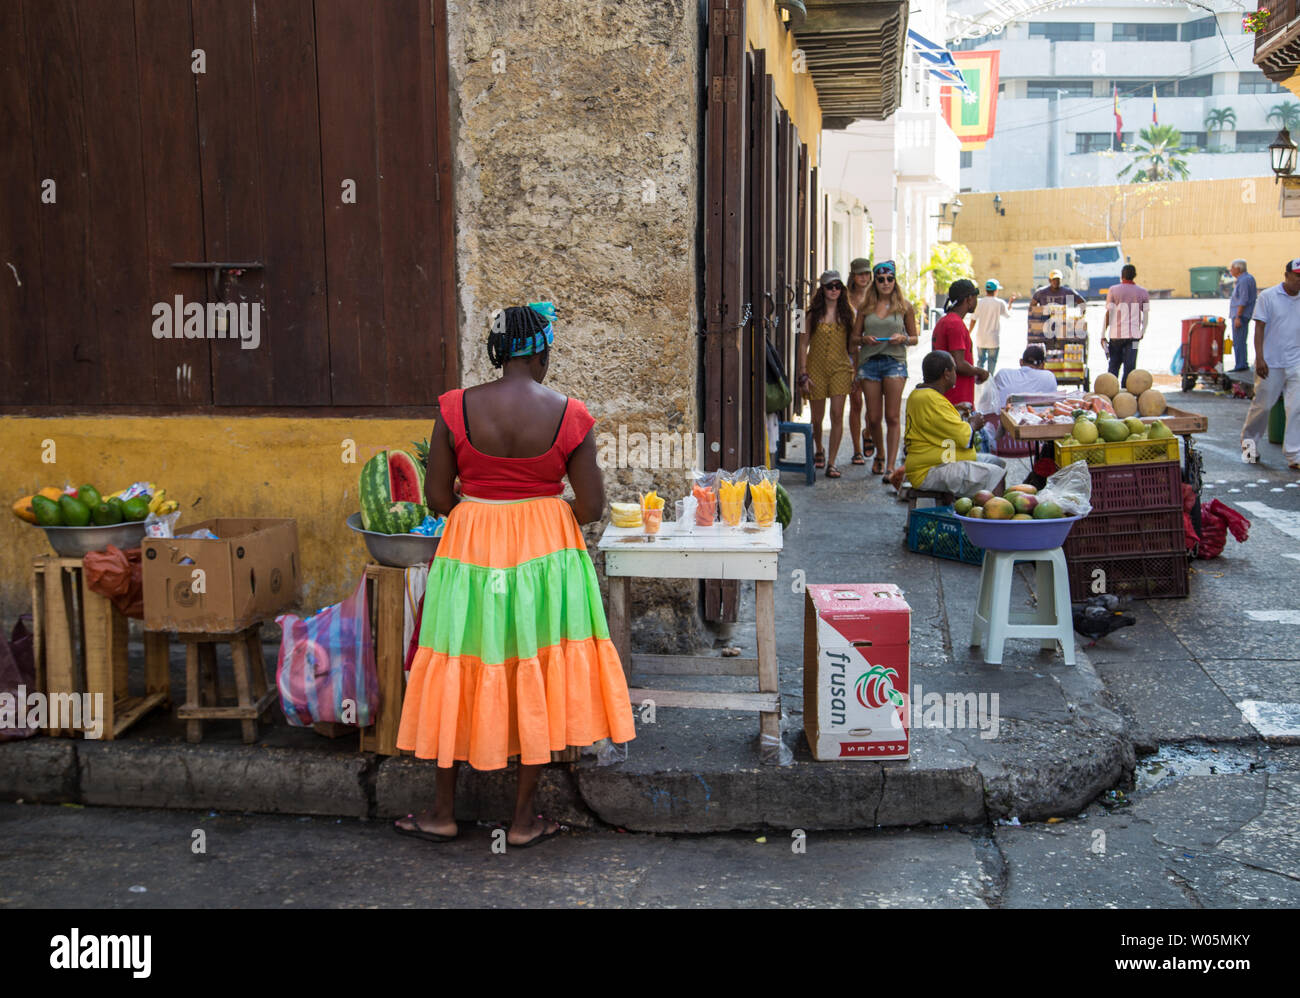 A woman in a colorful, bright dress sells fruit at a street stand on the streets of Cartagena, Colombia, in the historic center (Centro). Stock Photo